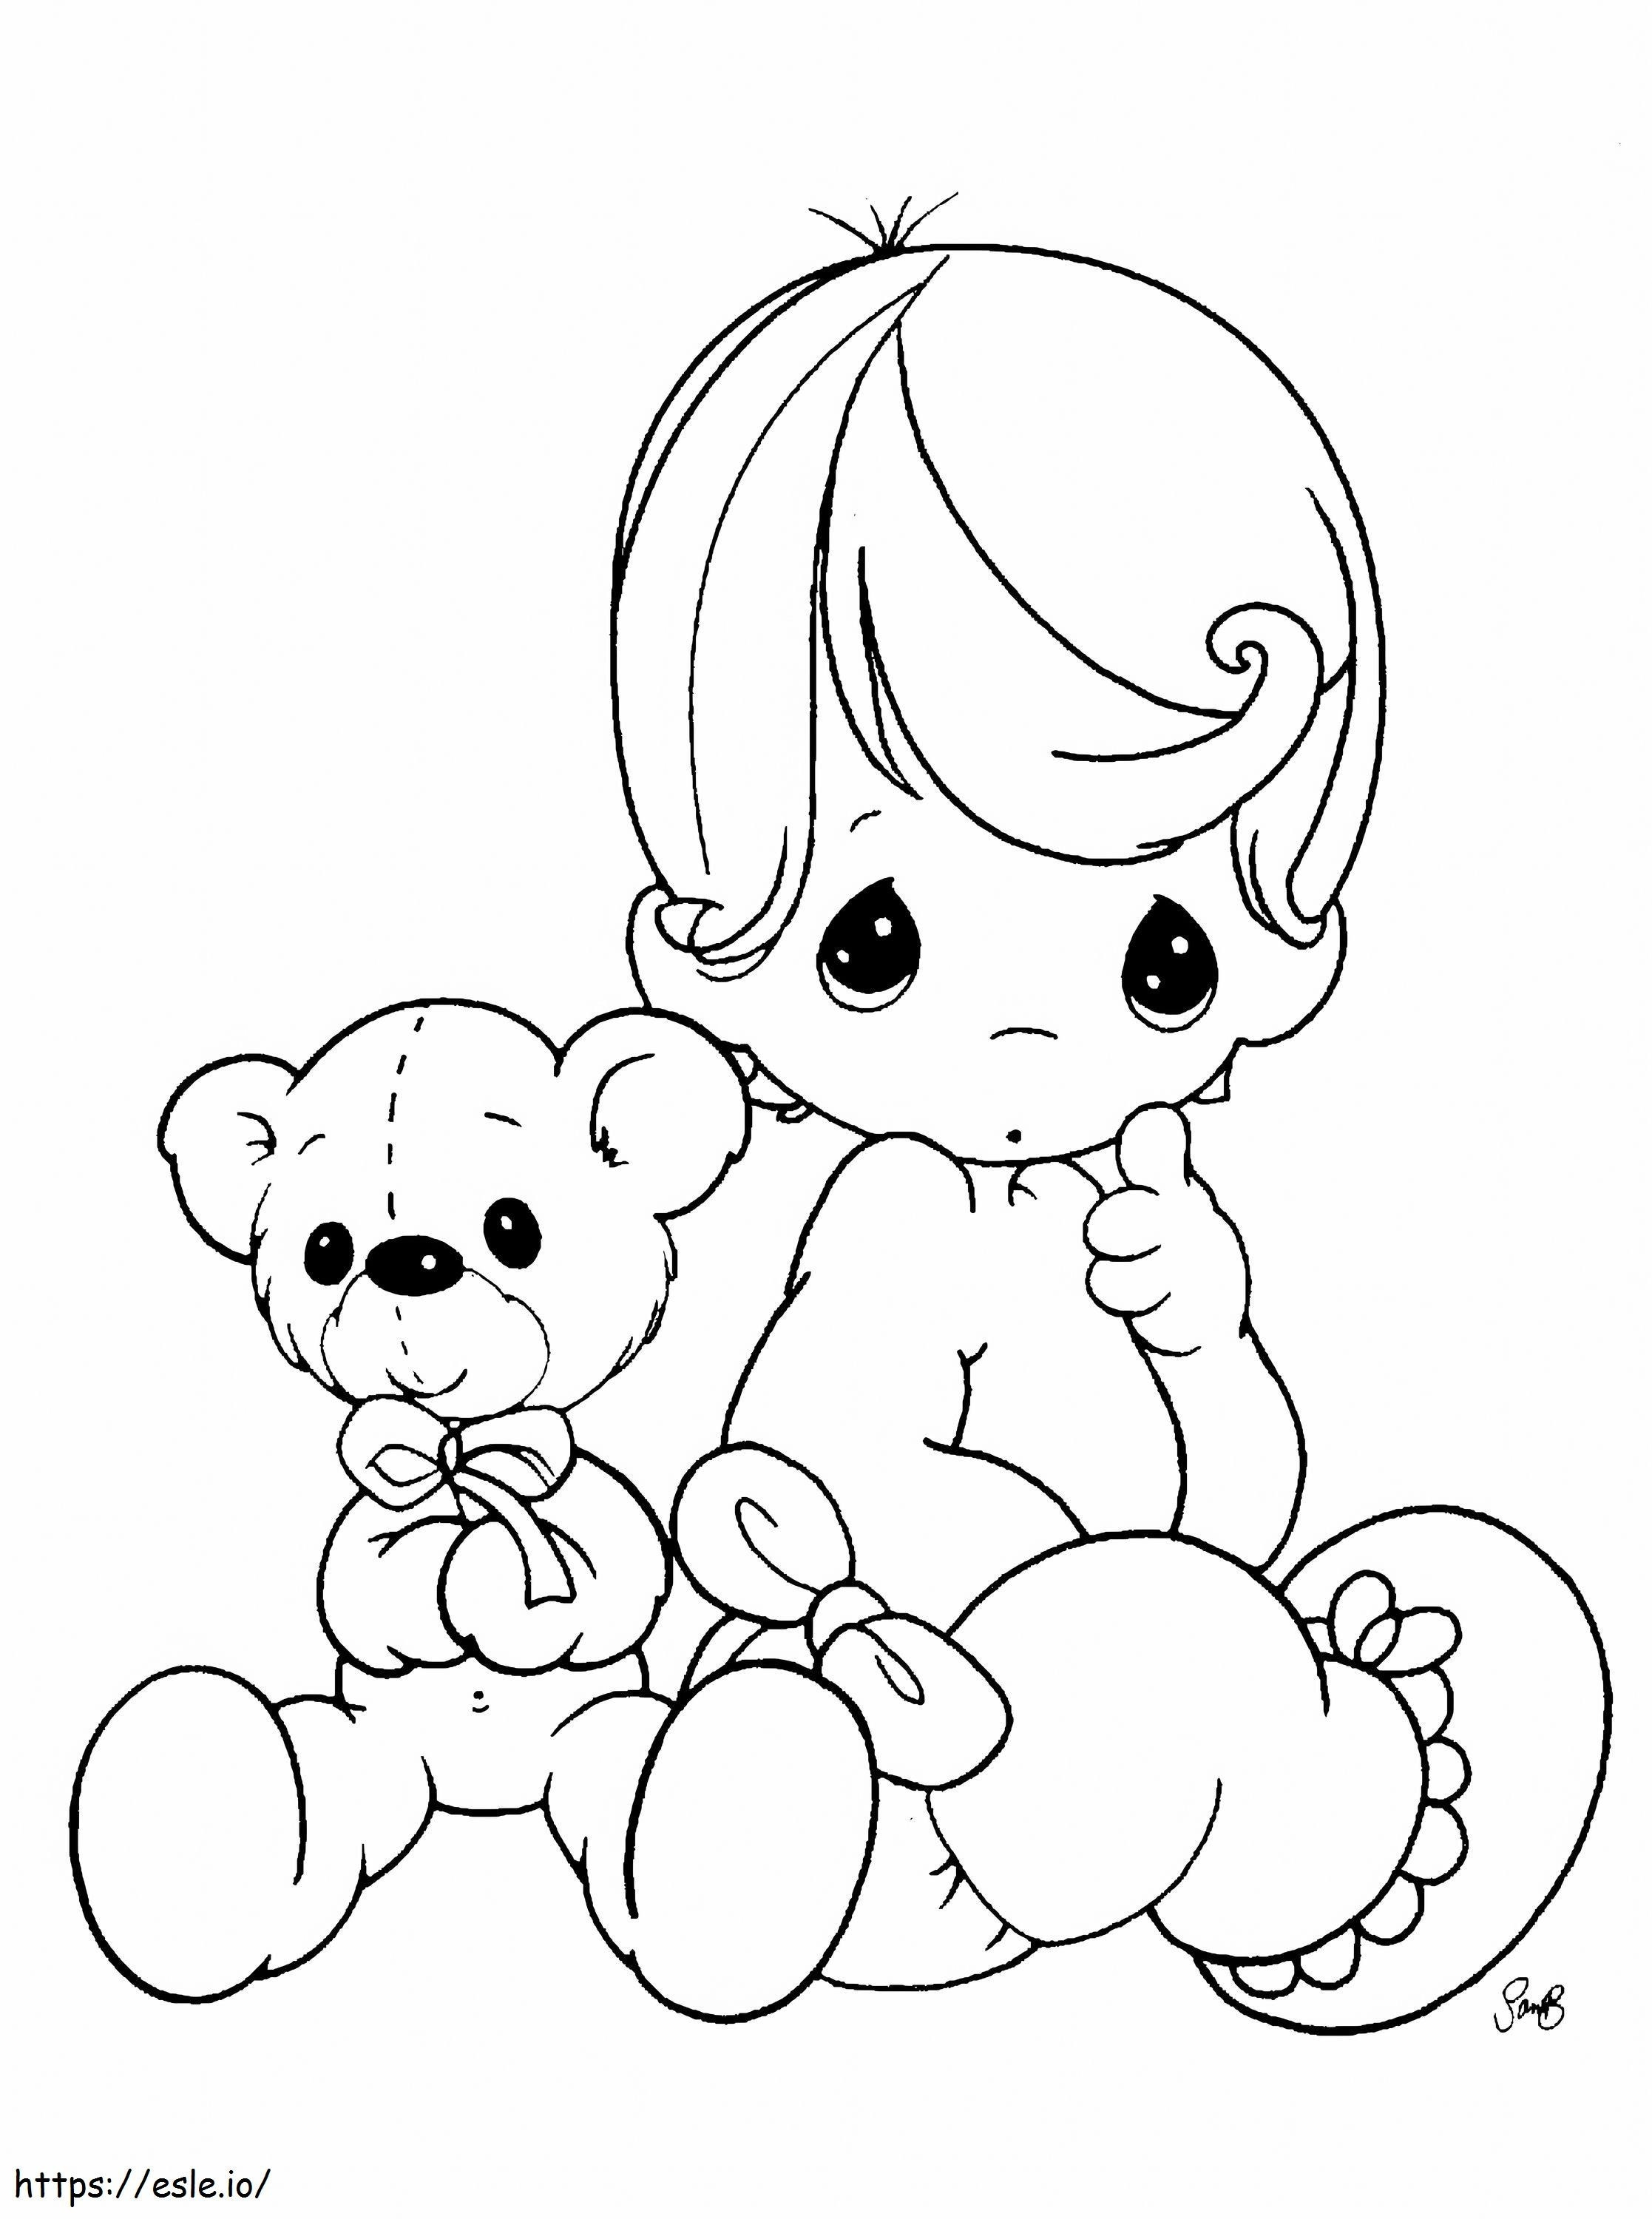 Coloriage  Coloriage Extraordinary Precious Moments Picture Inspirations Wallpaper Images Popular 1524X2047 For Phone à imprimer dessin